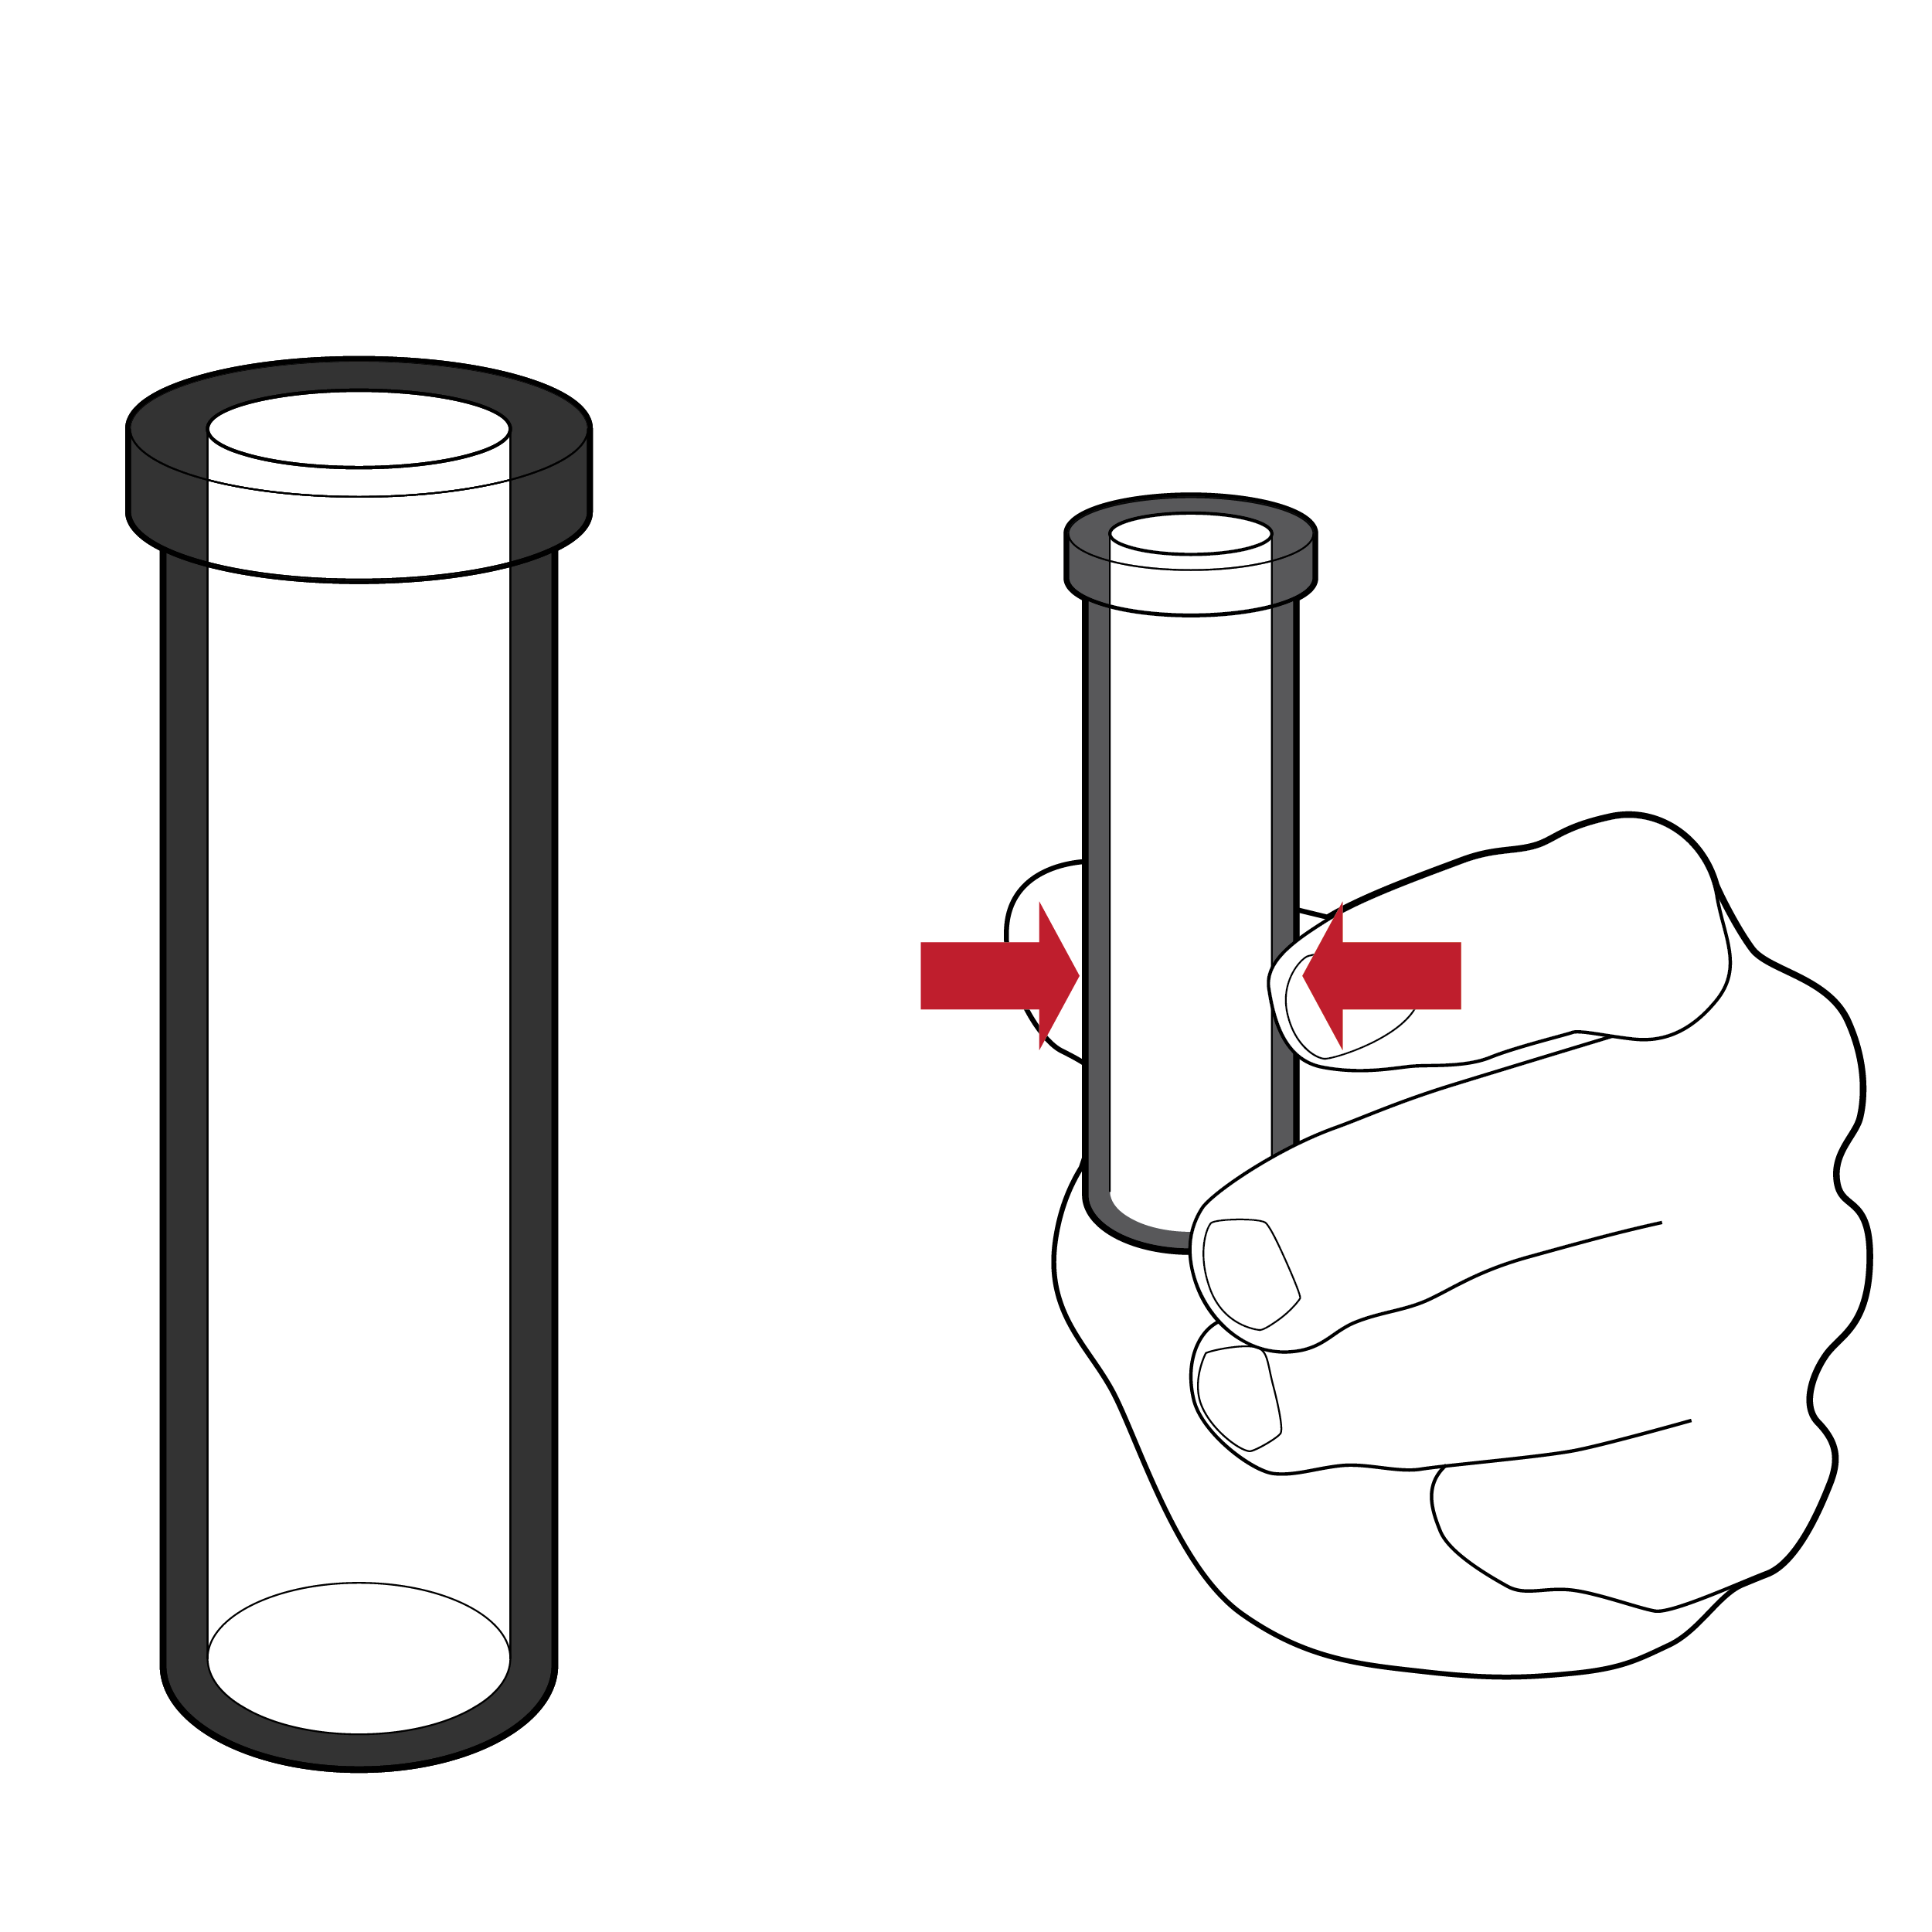 Cylindrical fluid vial with thick walls. A hand holding the vial at the center with a pinch grip has thick overlaid arrows, indicating difficulty in squeezing the vial.